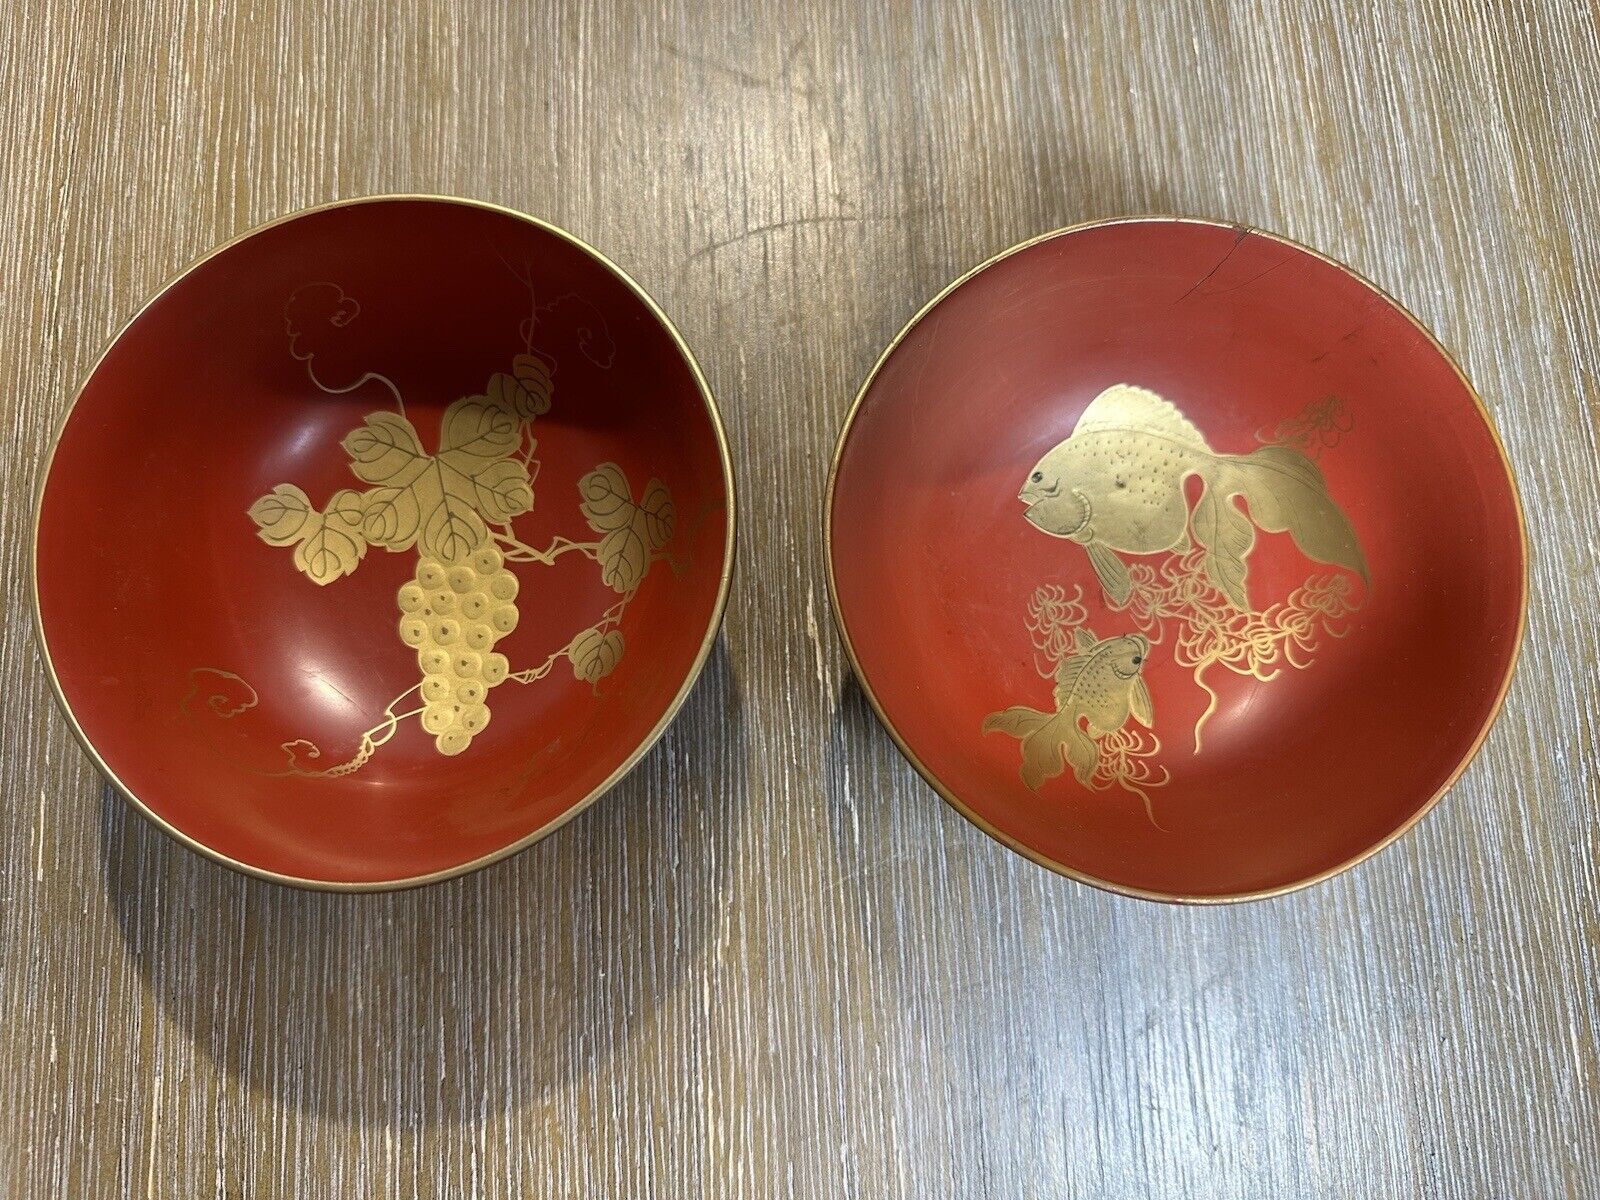 Two VTG/Antique Asian Lacquer Ware Bowls - Goldfish & Grapes Design in Gold